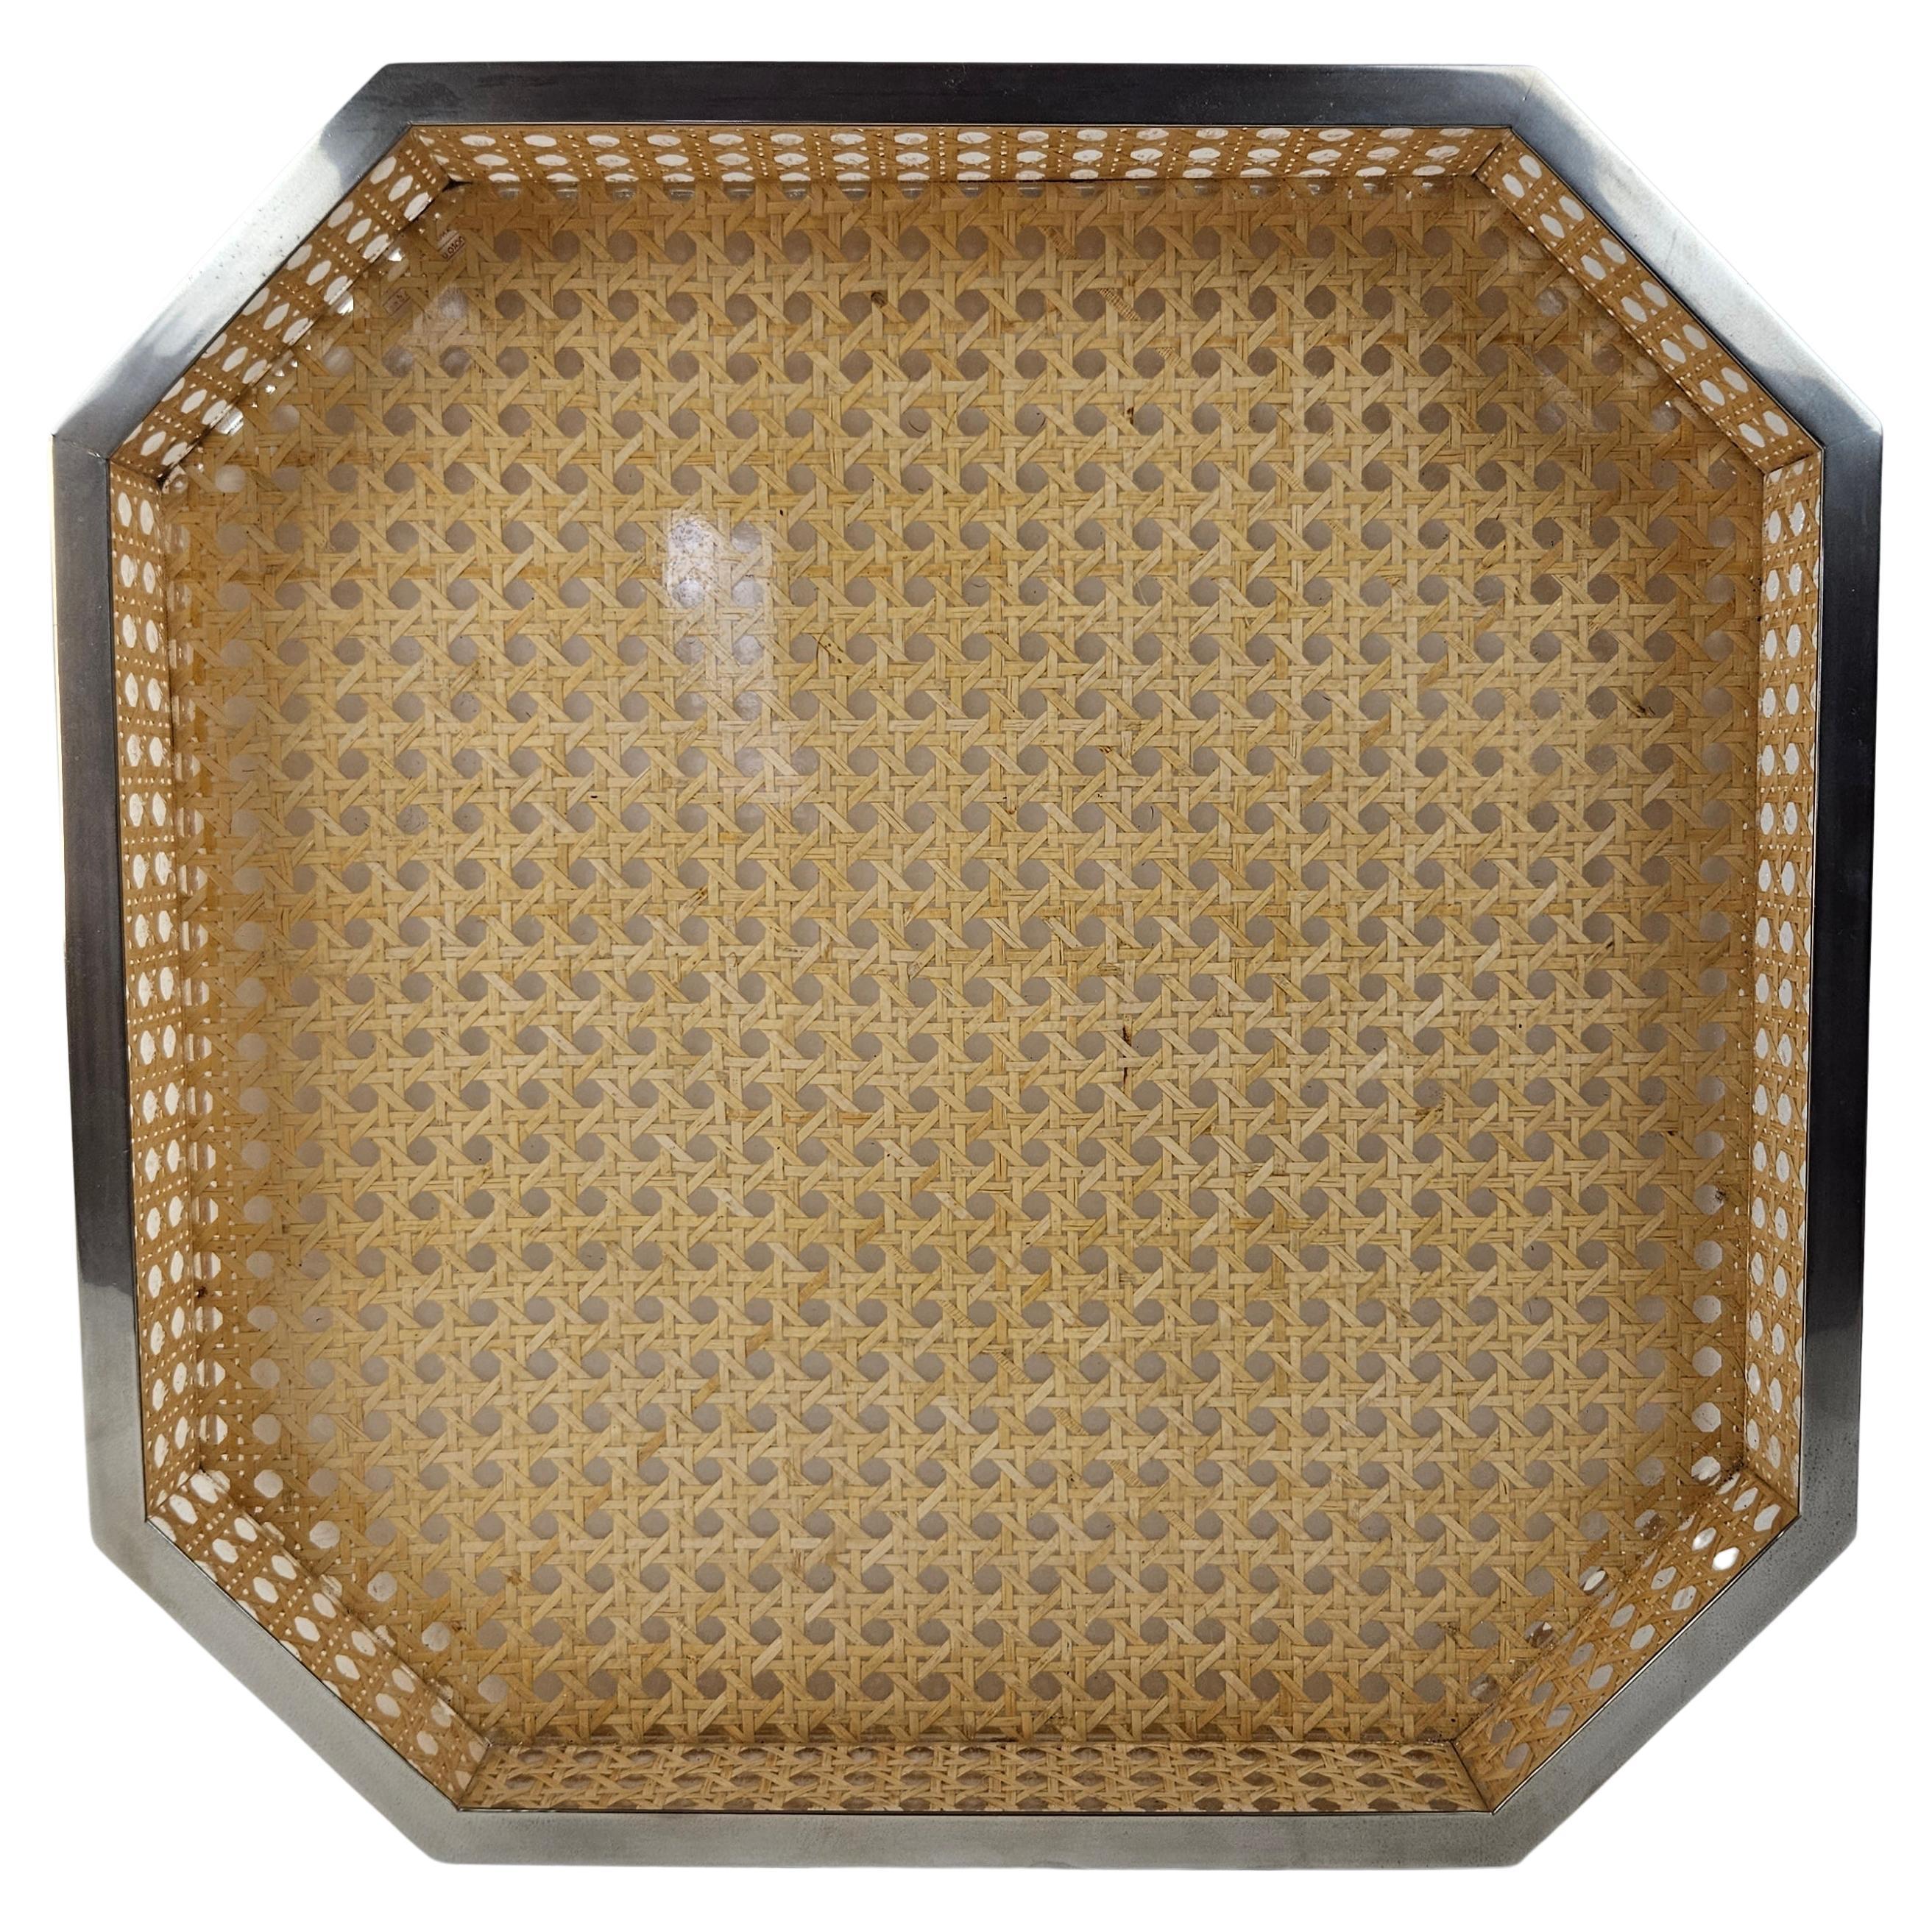 Serving Tray in Lucite, Rattan and 24k Gold, Italy 1970s For Sale